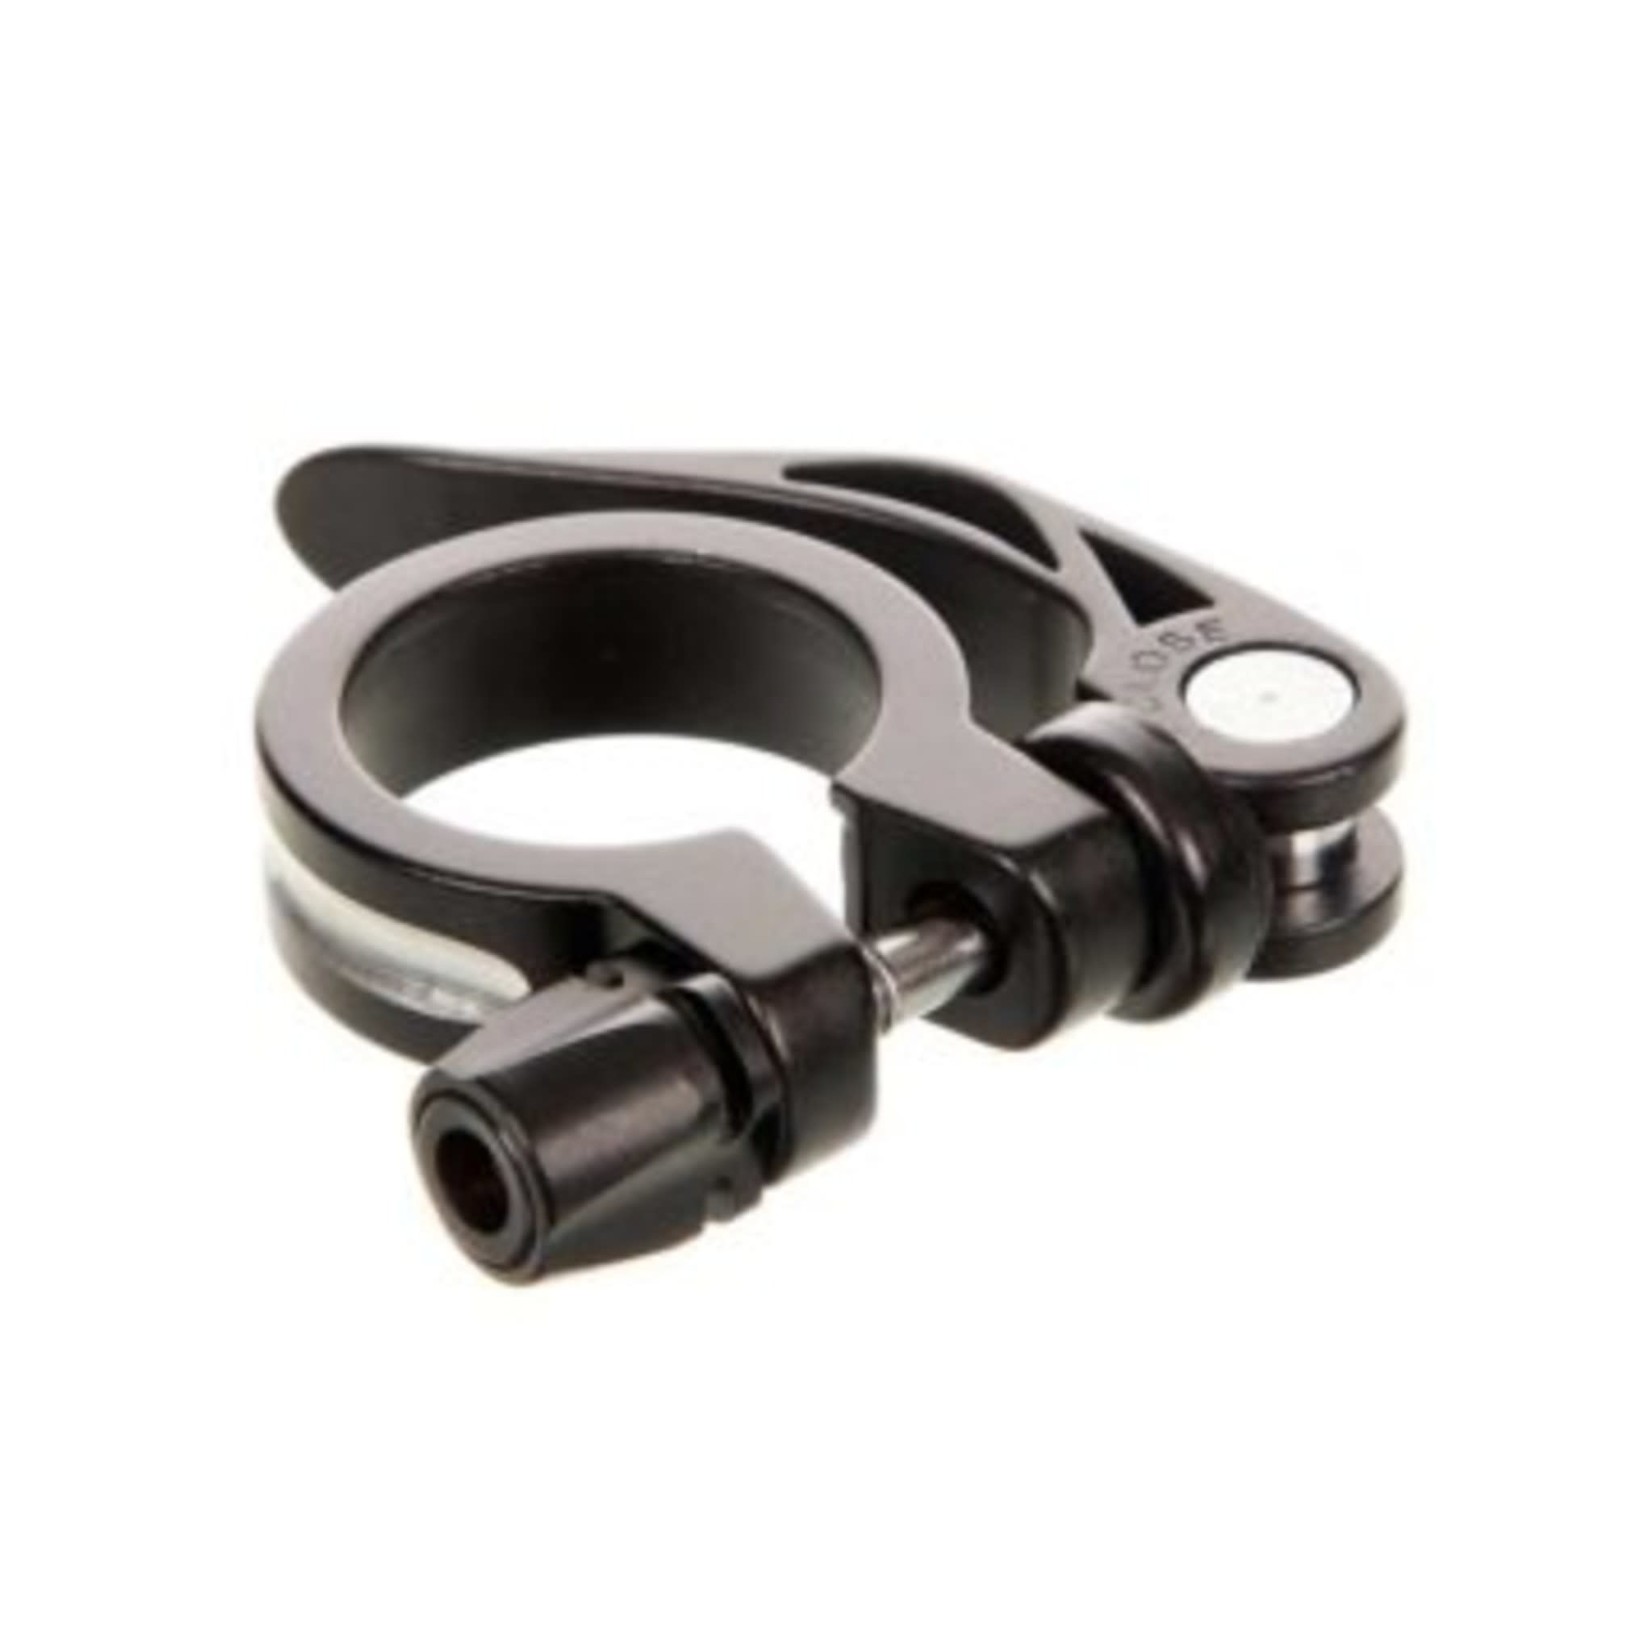 EVO, Seatpost clamp with integrated quick release skewer, 29.8 mm, Black